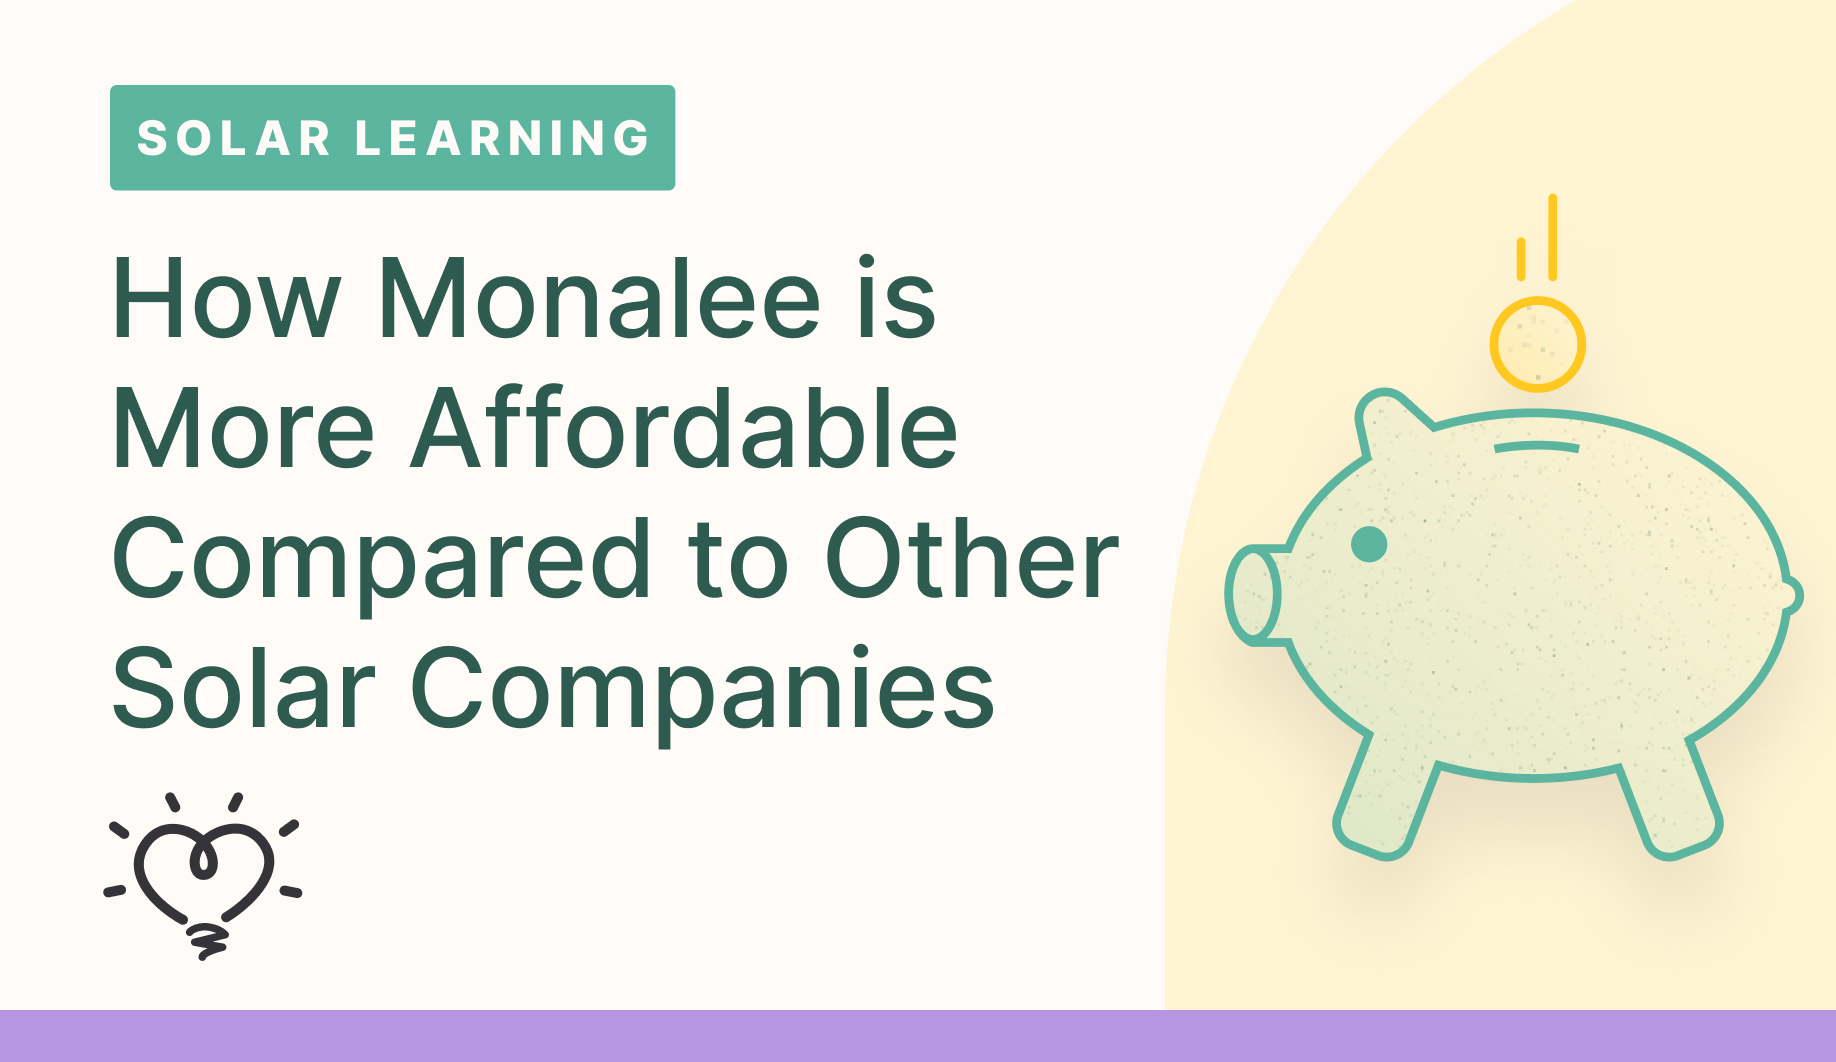 How Monalee is More Affordable Compared to Other Solar Companies